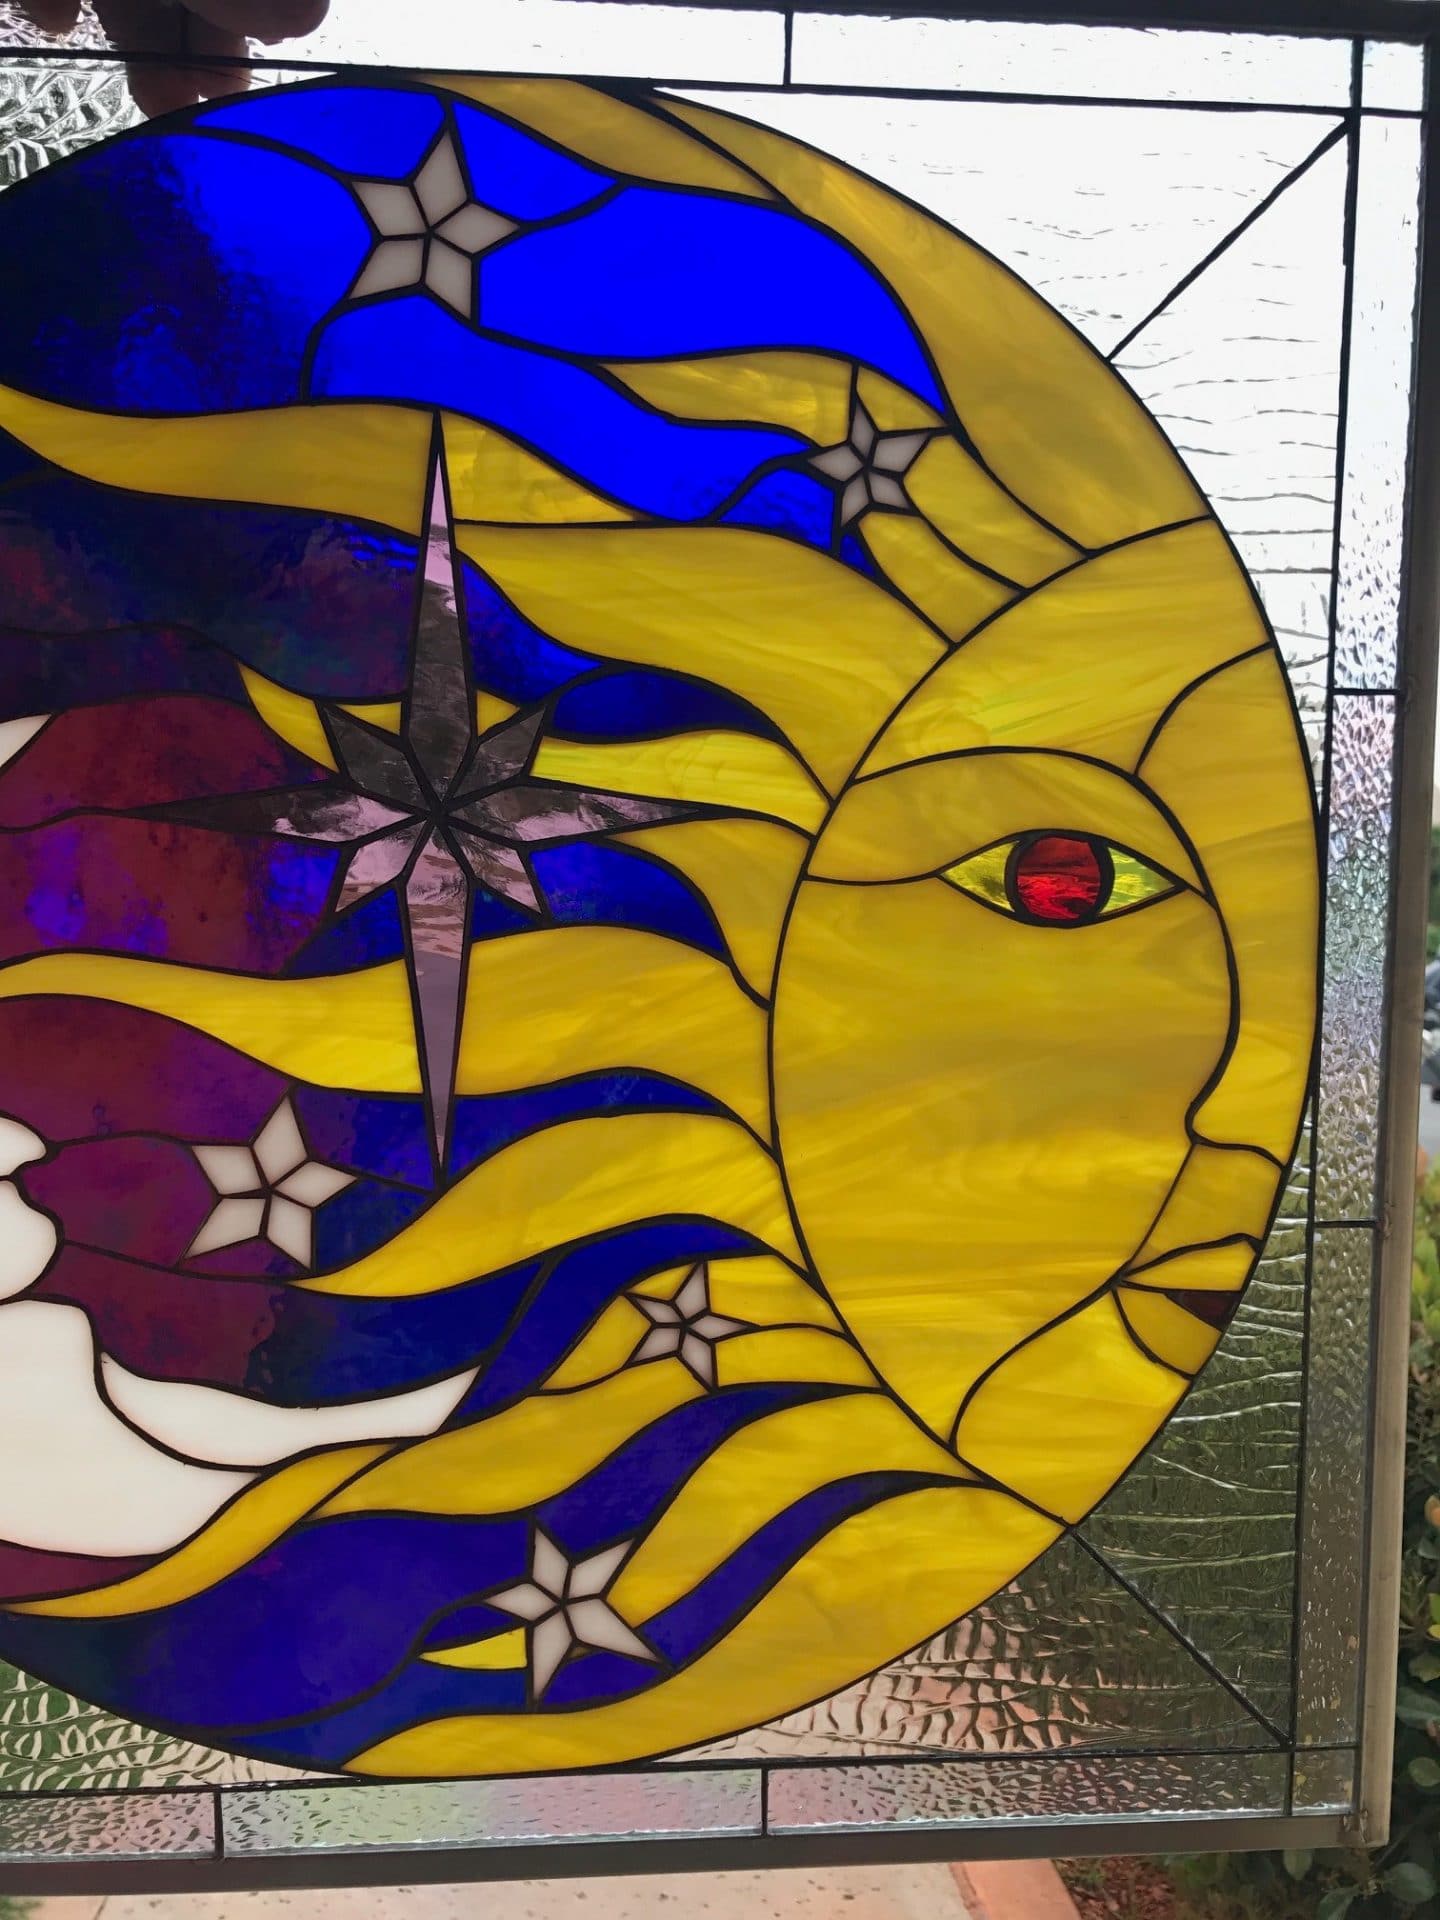 So Pretty! Crescent Moon, Sun & Stars "Leaded Stained Glass Window Panel"